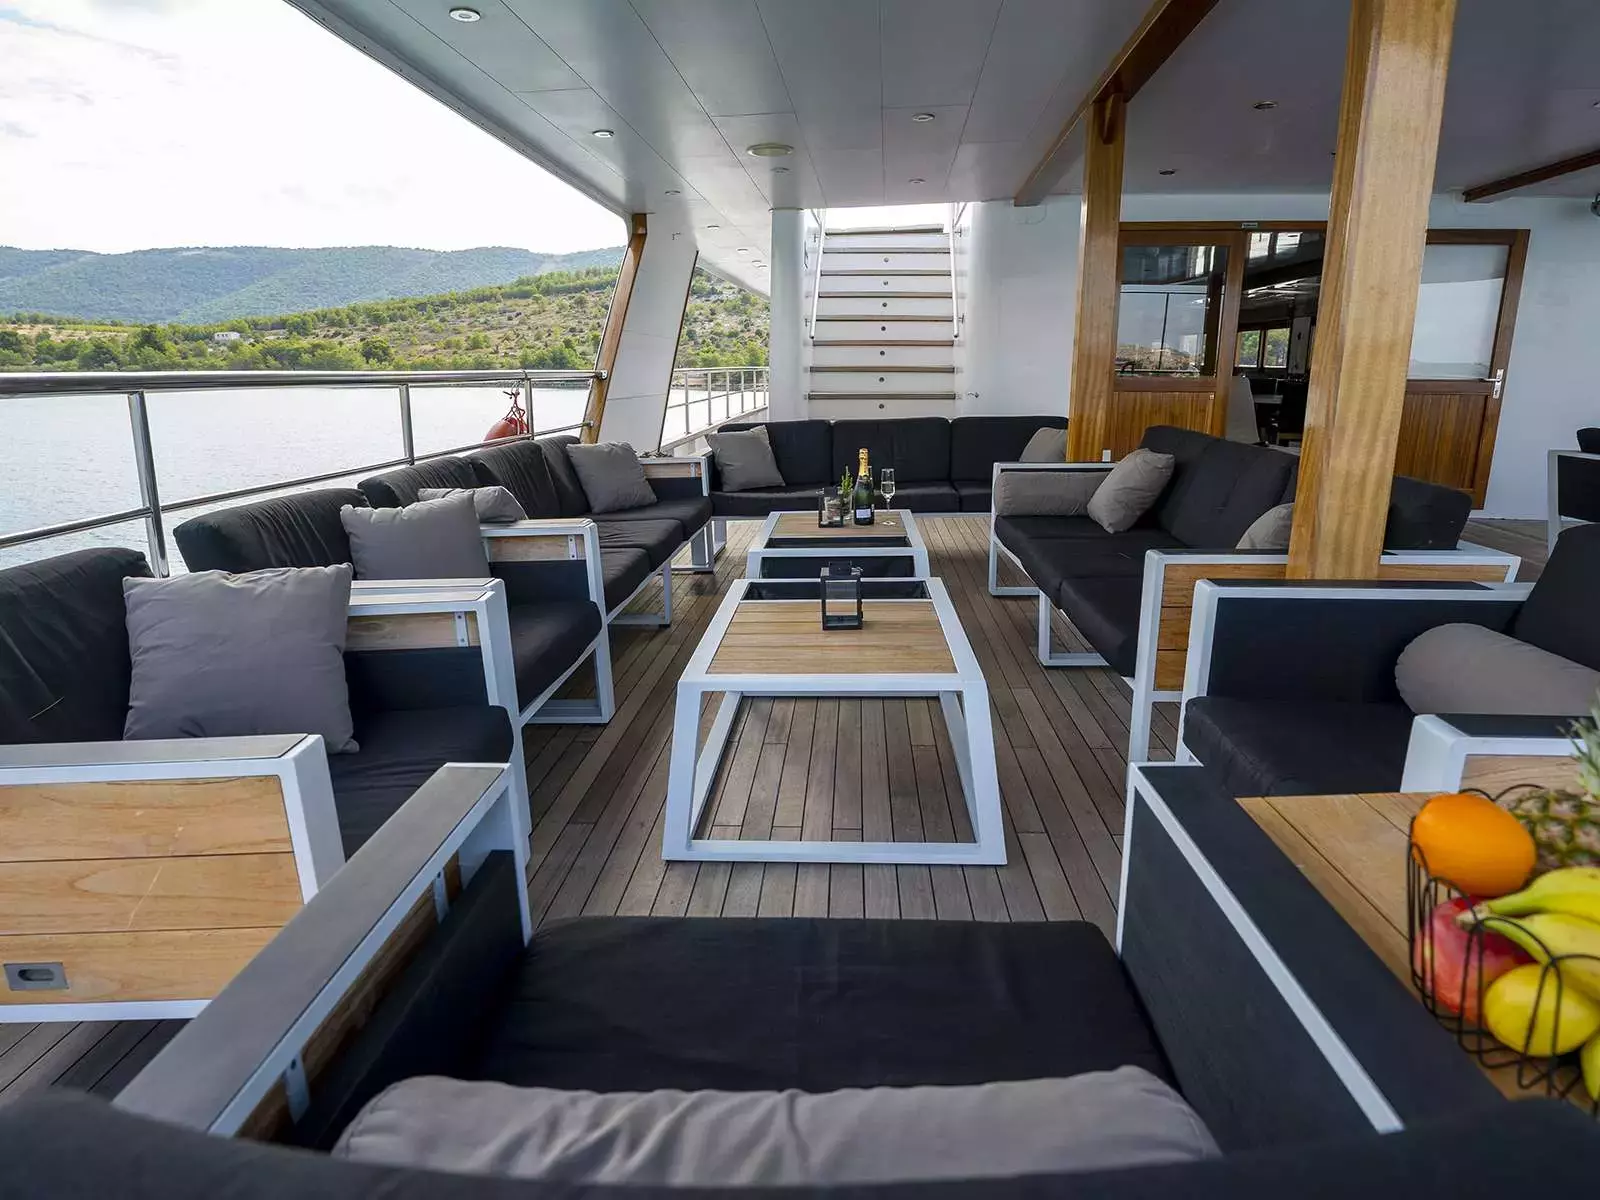 Karizma by Custom Made - Special Offer for a private Motor Yacht Charter in Budva with a crew